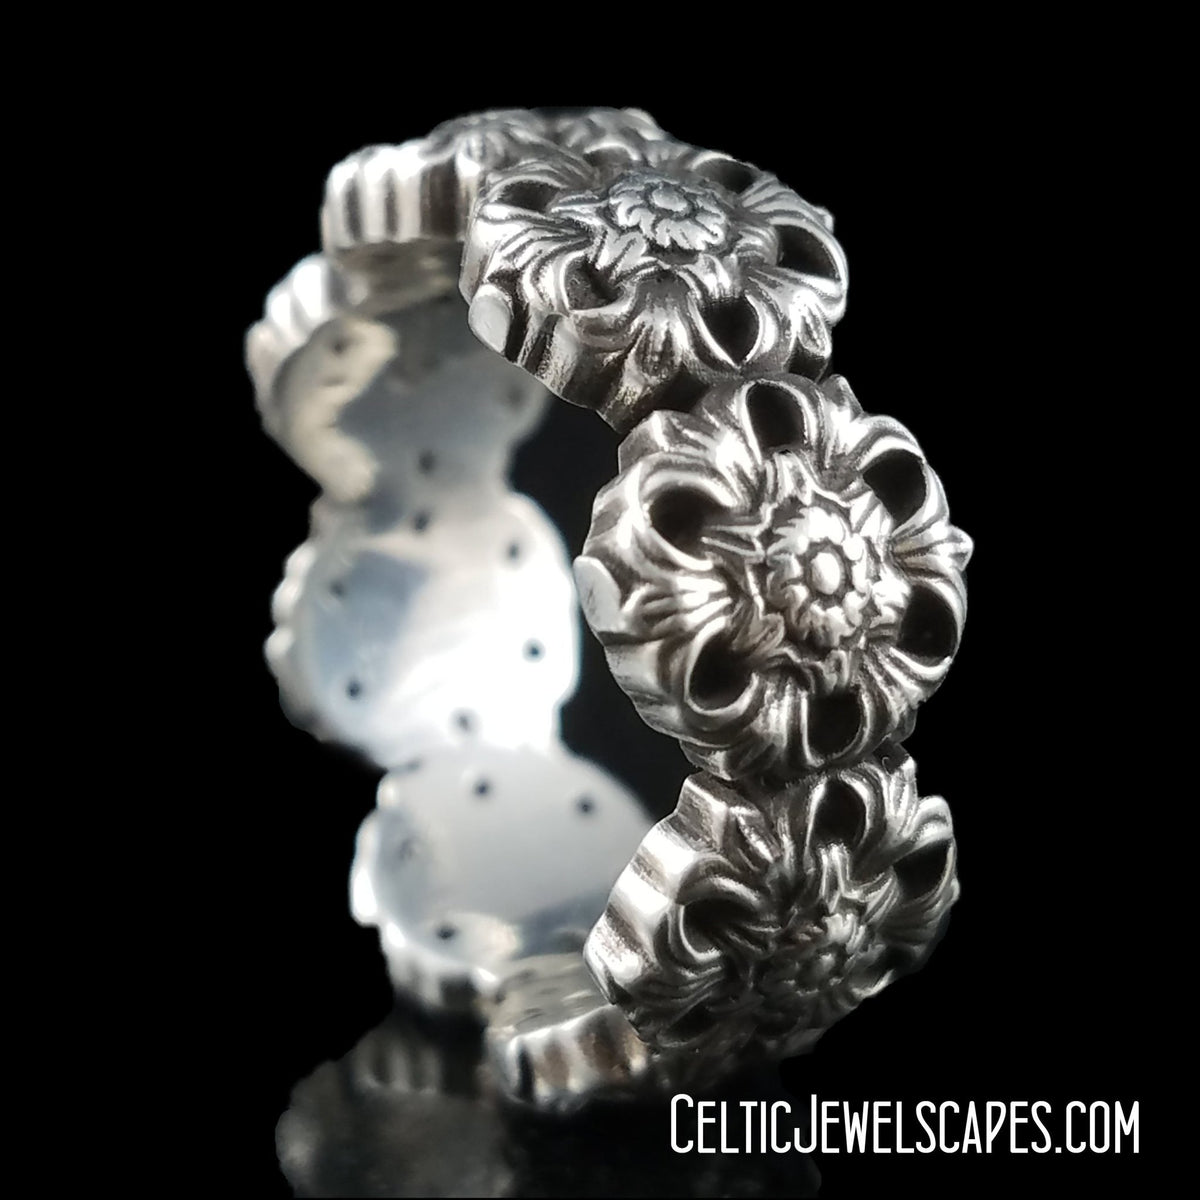 MUIRA - Starting at $199 - Celtic Jewelscapes